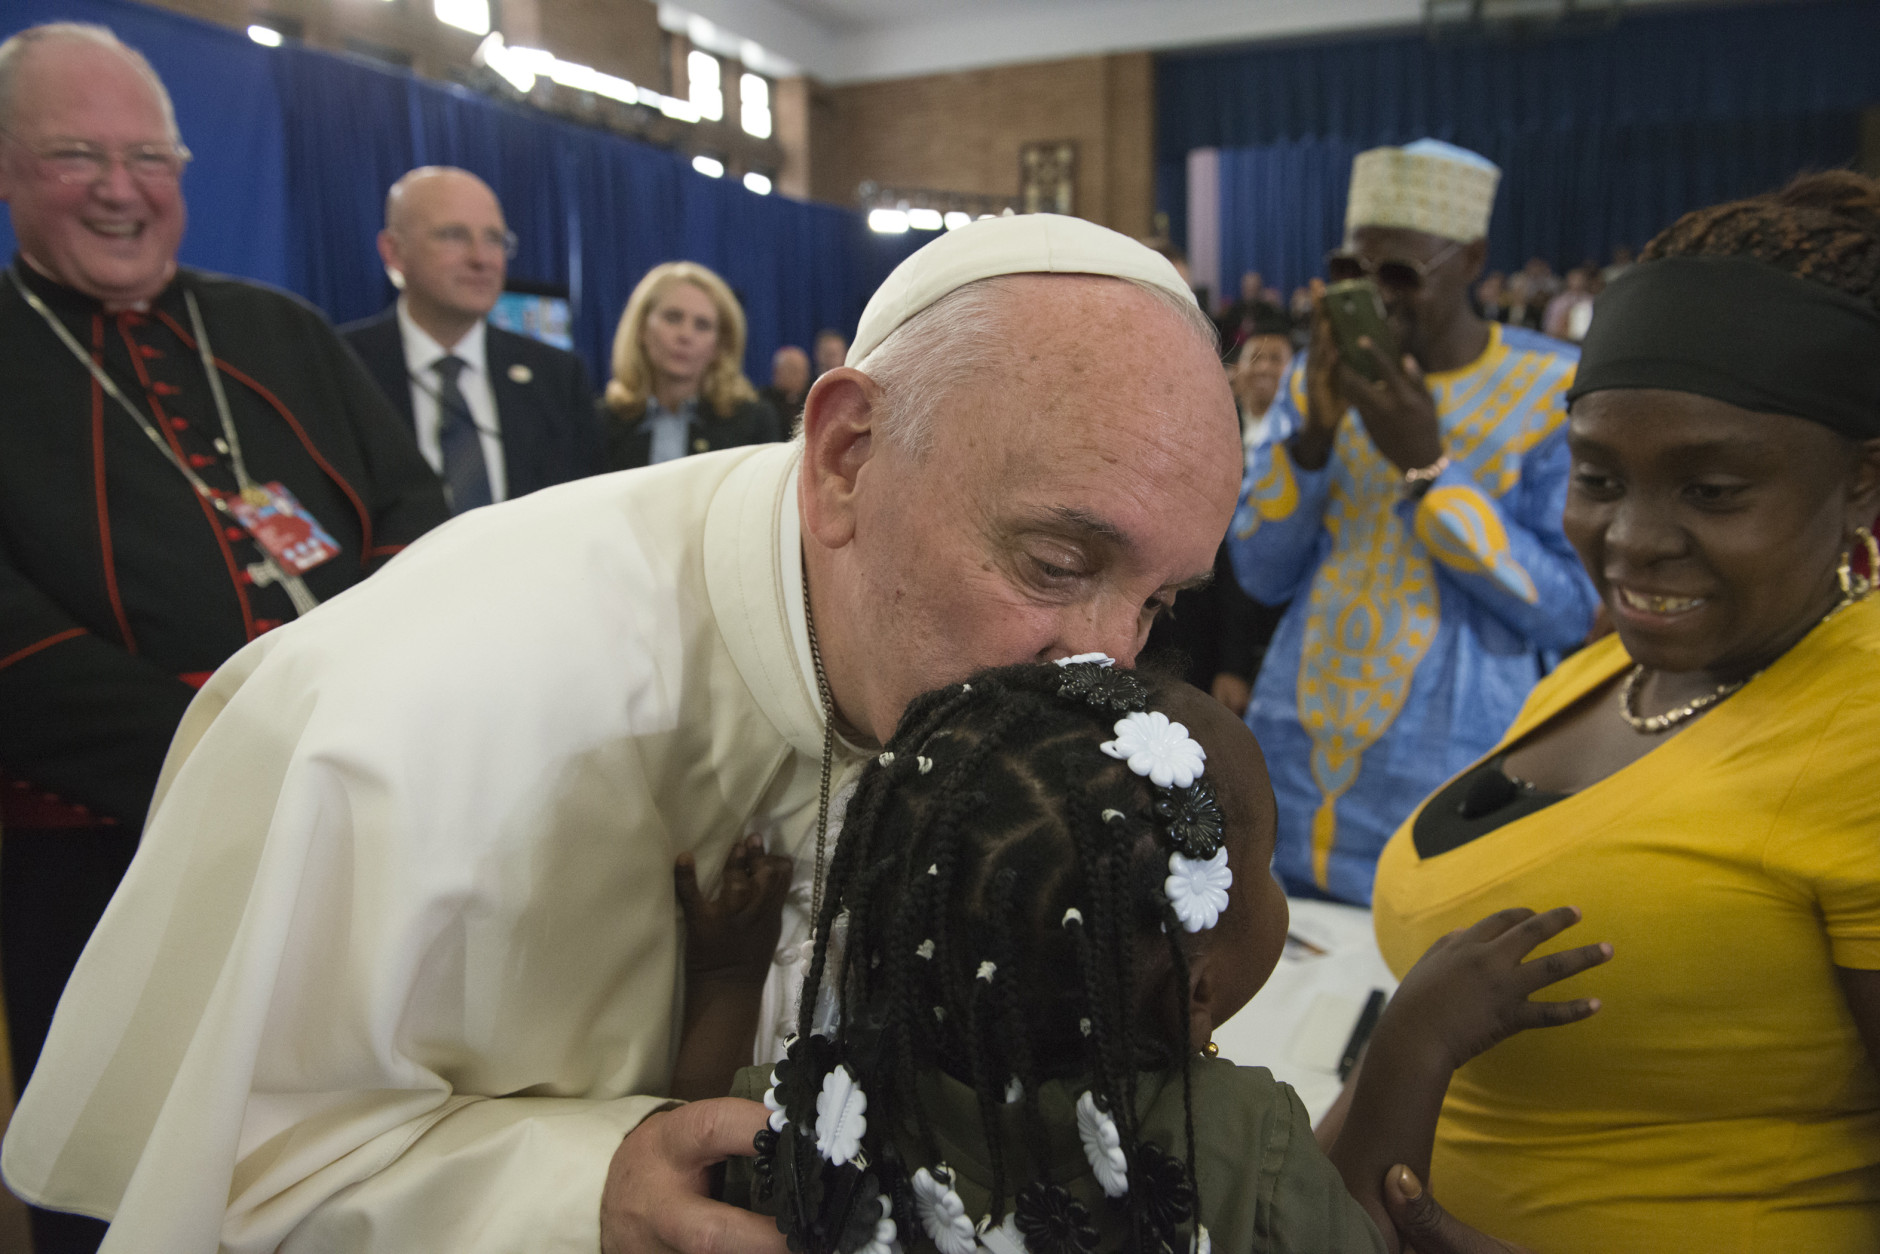 NEW YORK, NY - SEPTEMBER 25: Pope Francis greets people inside Our Lady Queen of Angels School September 25, 2015 in the East Harlem neighborhood of New York City. Pope Francis is in New York on a two day visit and will carry out a number of engagements including a Papal motorcade through Central Park and a Mass in Madison Square Garden. (Photo by Stephanie Keith-Pool/Getty Images)